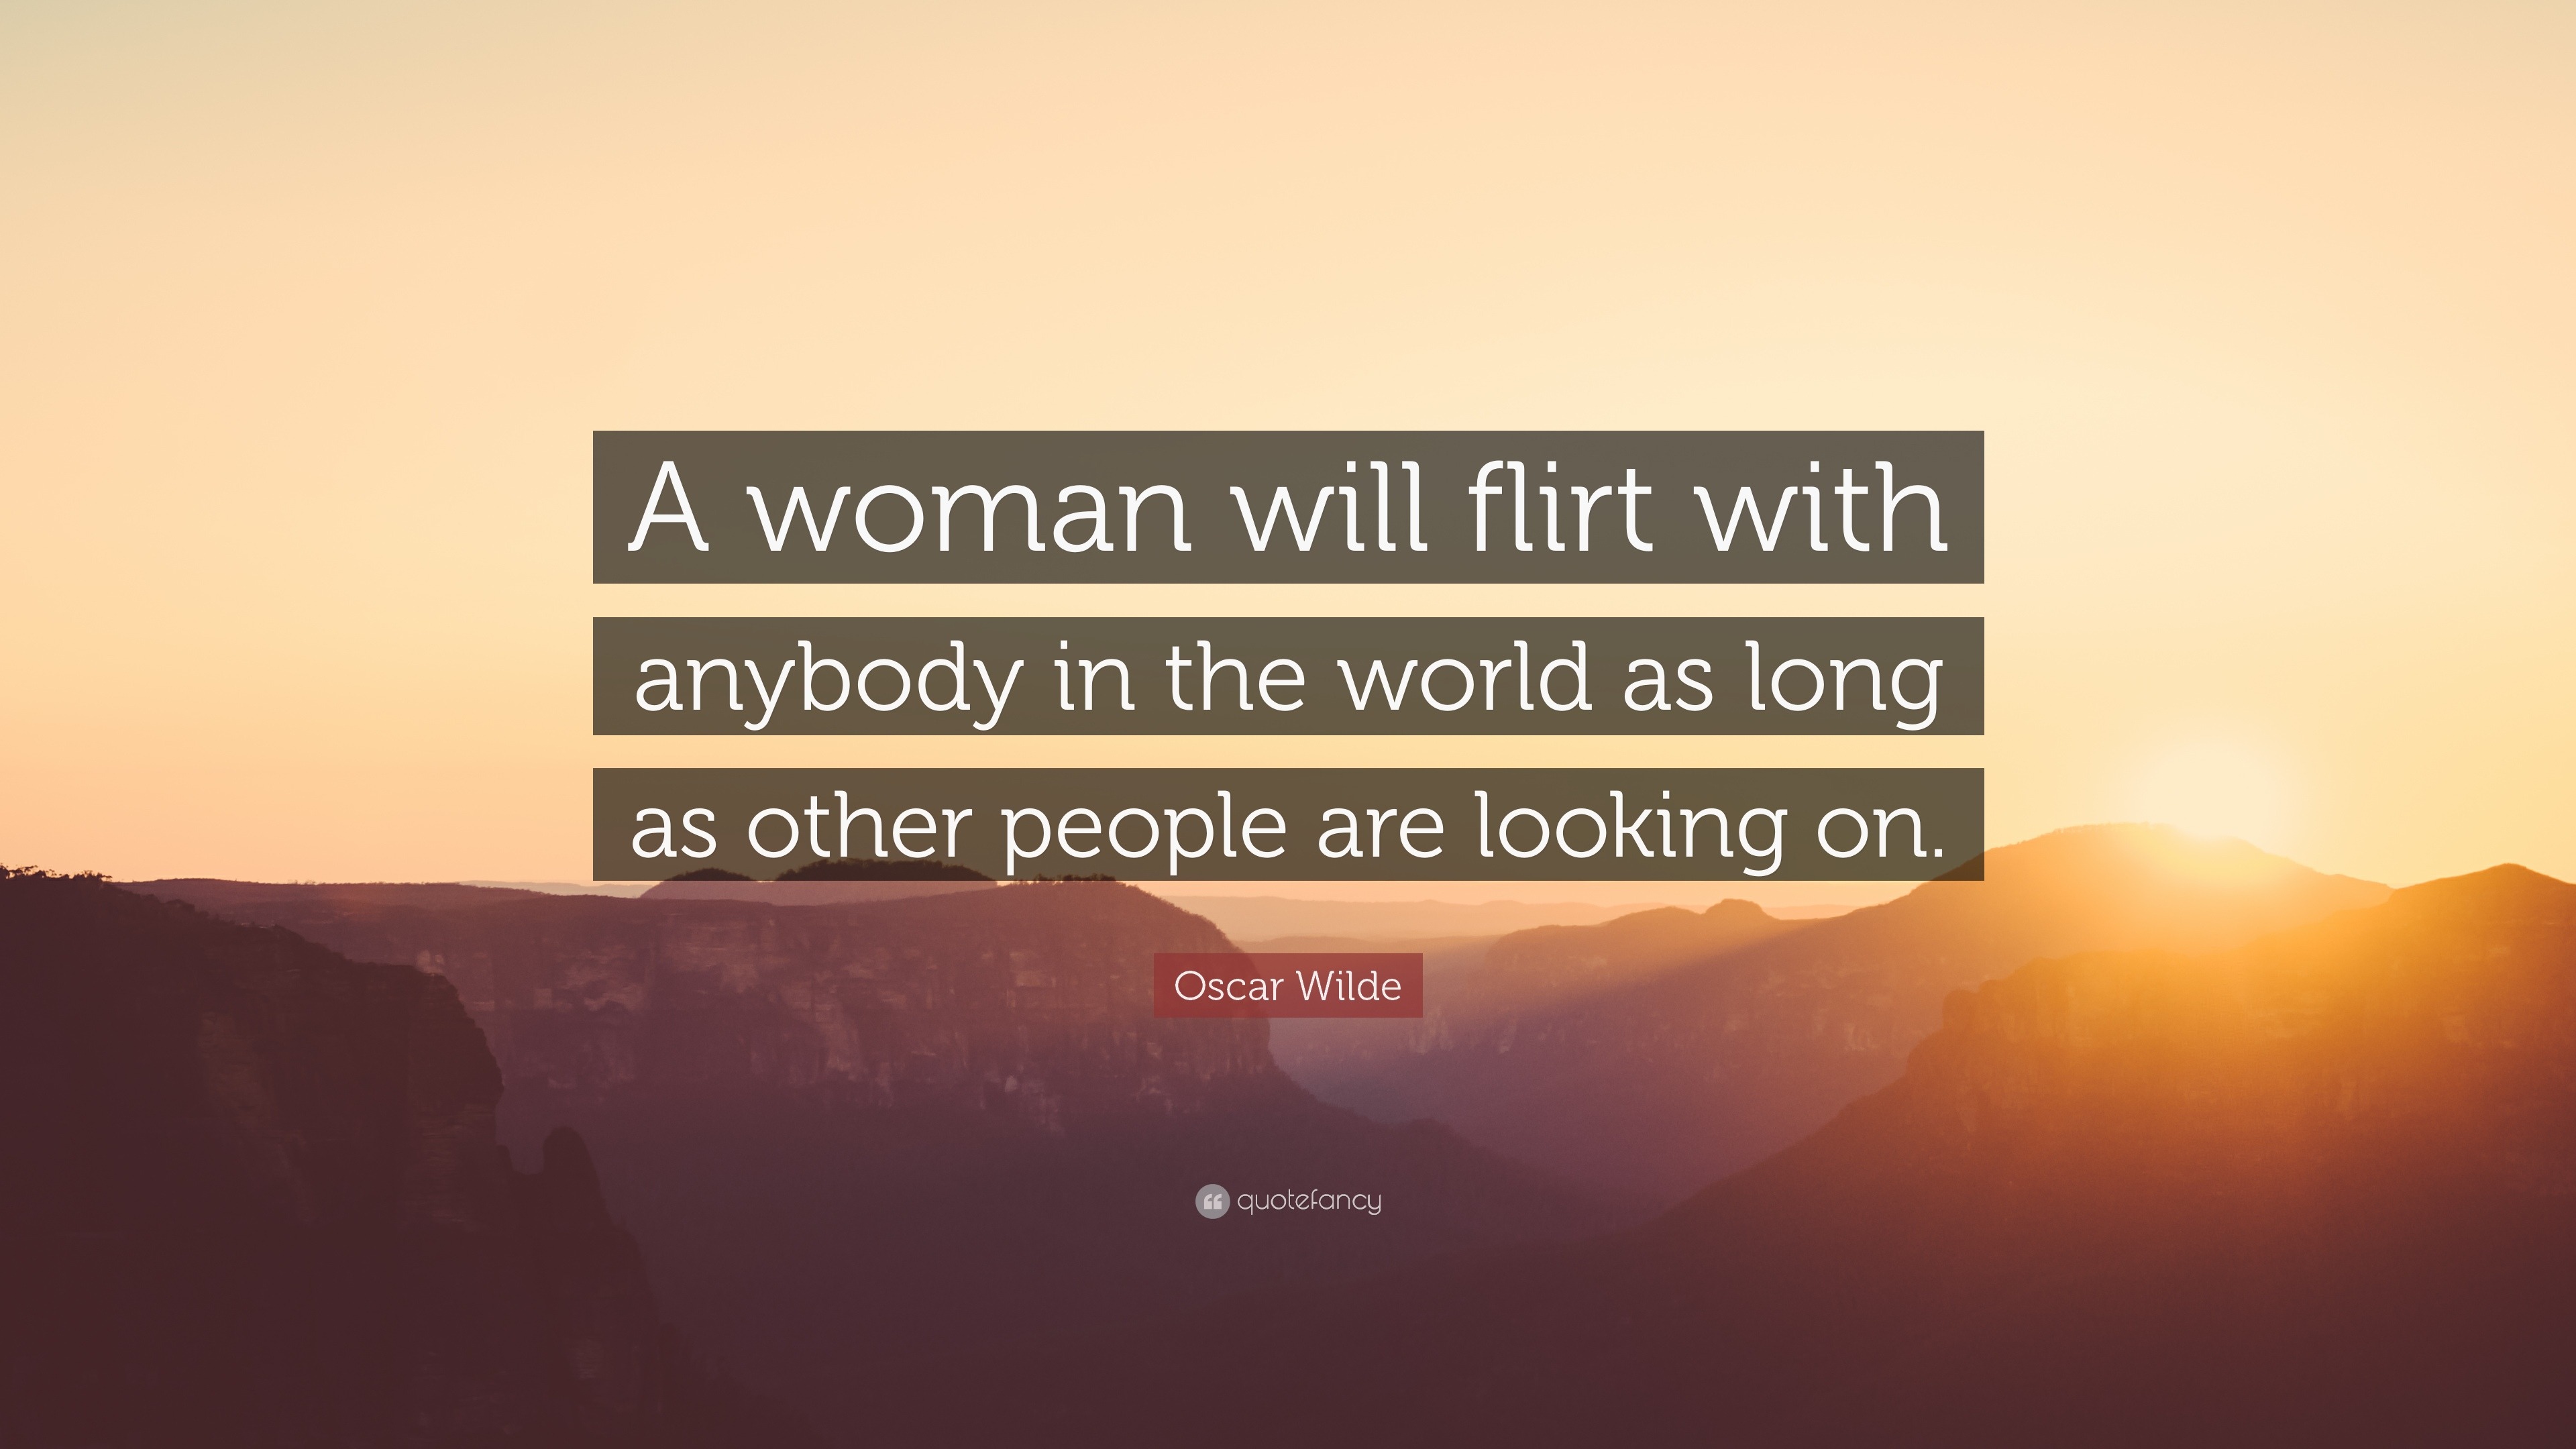 Oscar Wilde Quote: “A woman will flirt with anybody in the world as ...